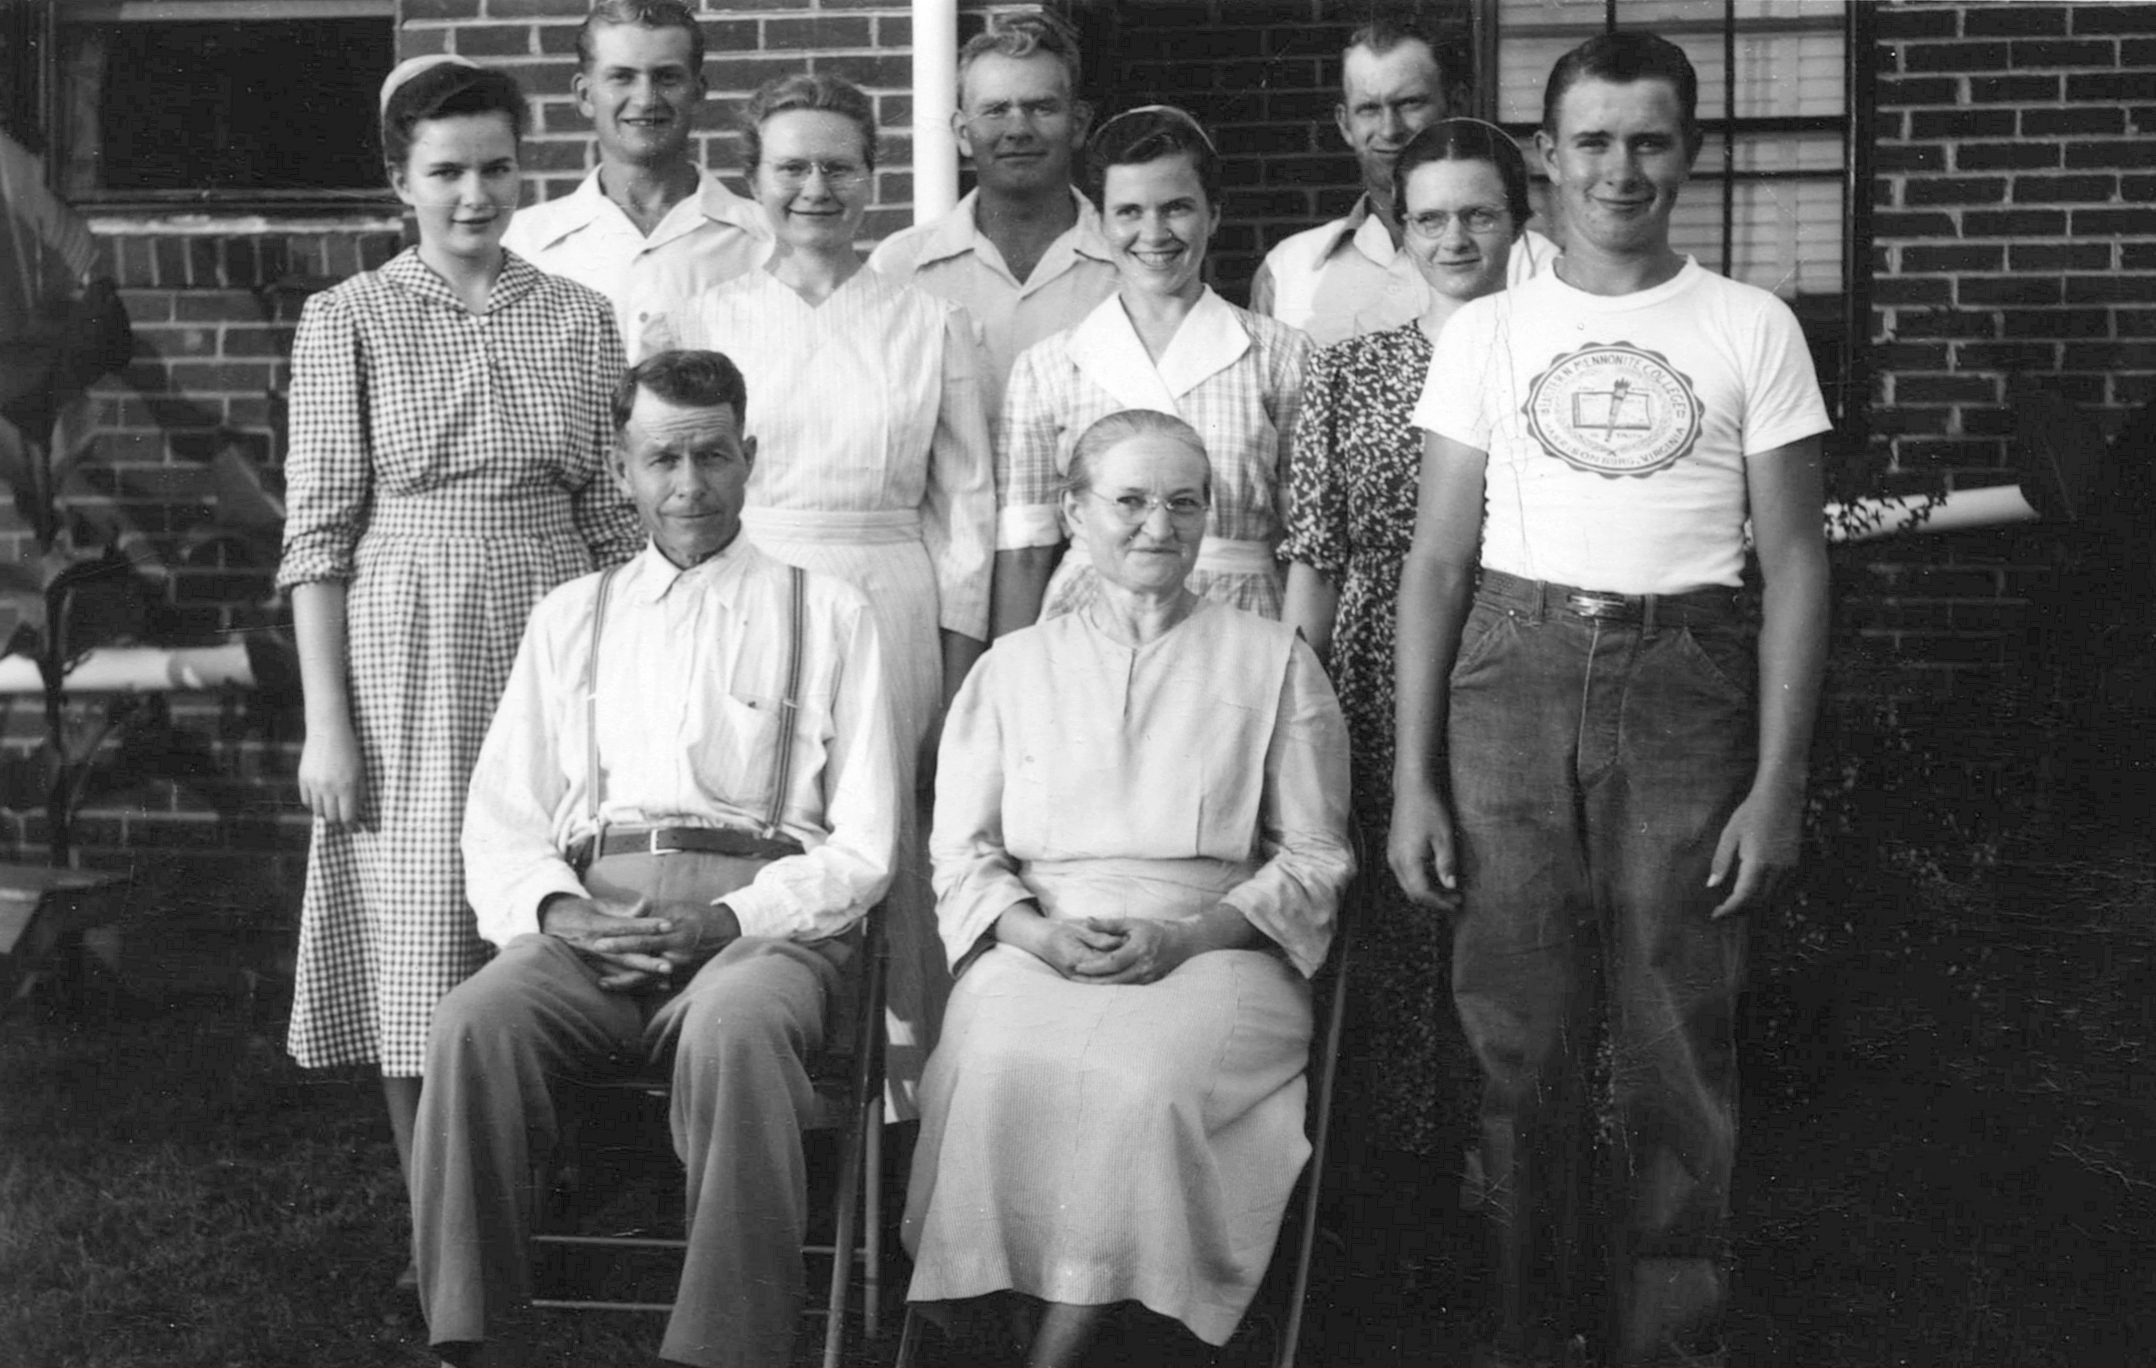 Marjorie's parents and siblings, L to R back to front Leonard, Milton, Winfred, Shirley, Dorothy, Lois, Marjorie, Ralph, Ira and Edna